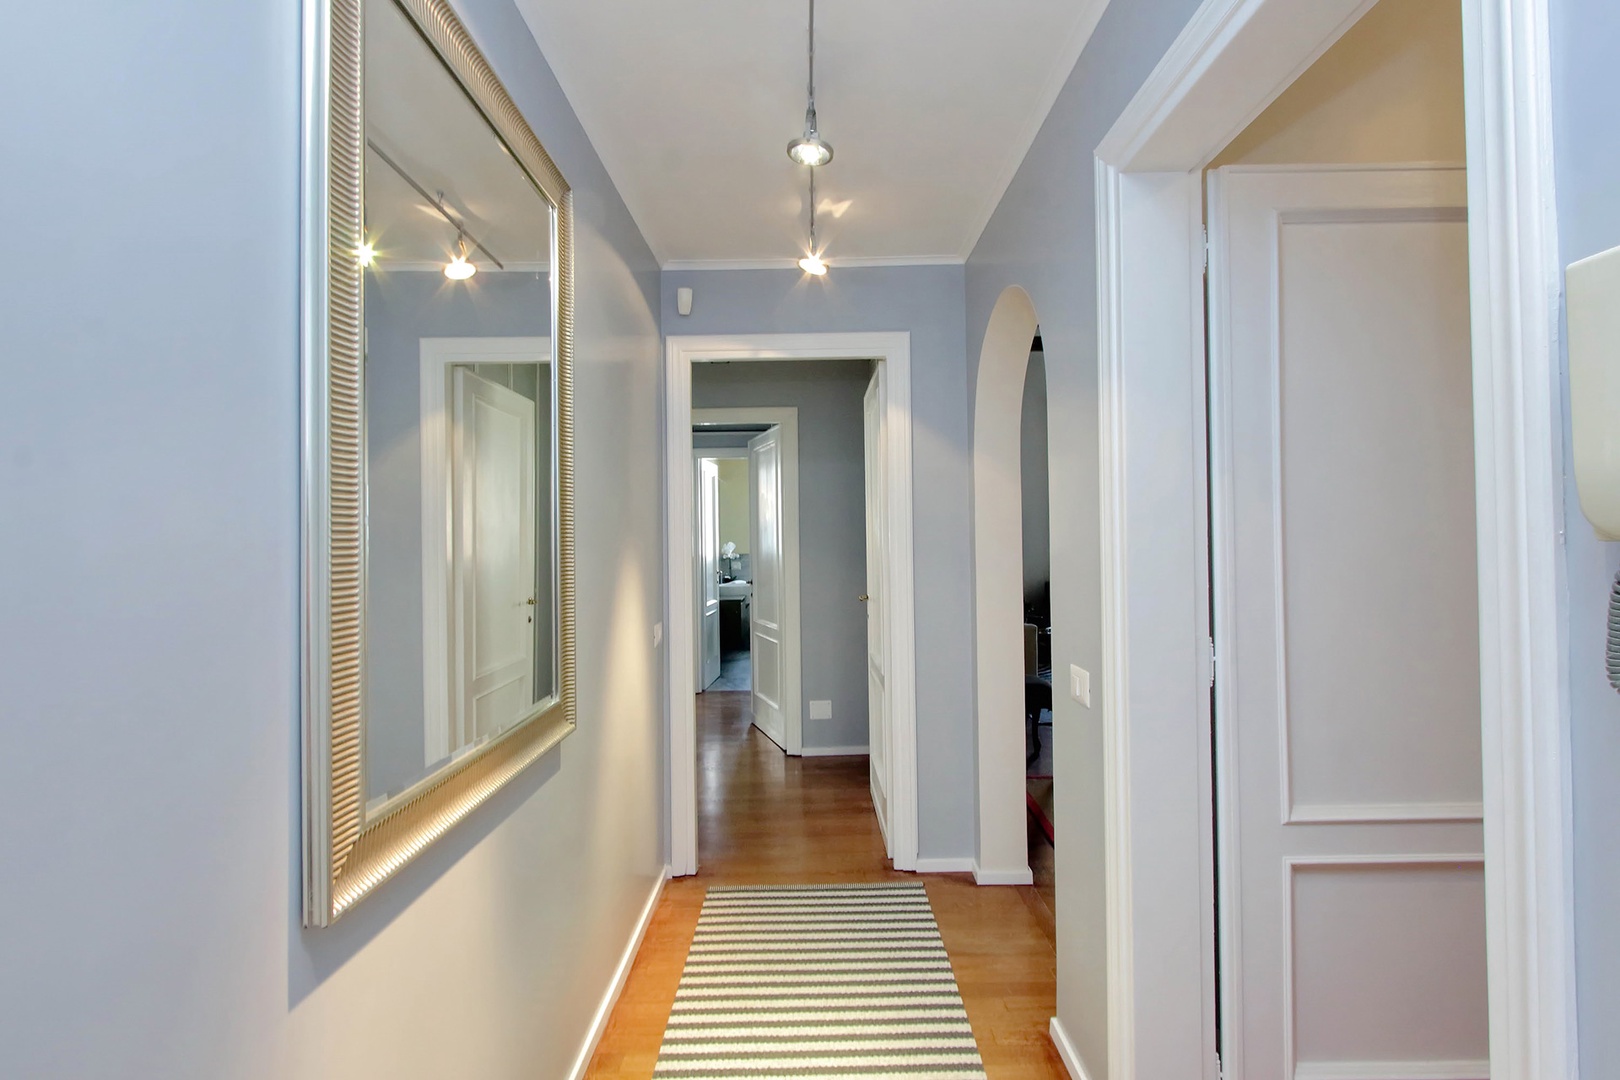 Step through front door to the entry hall